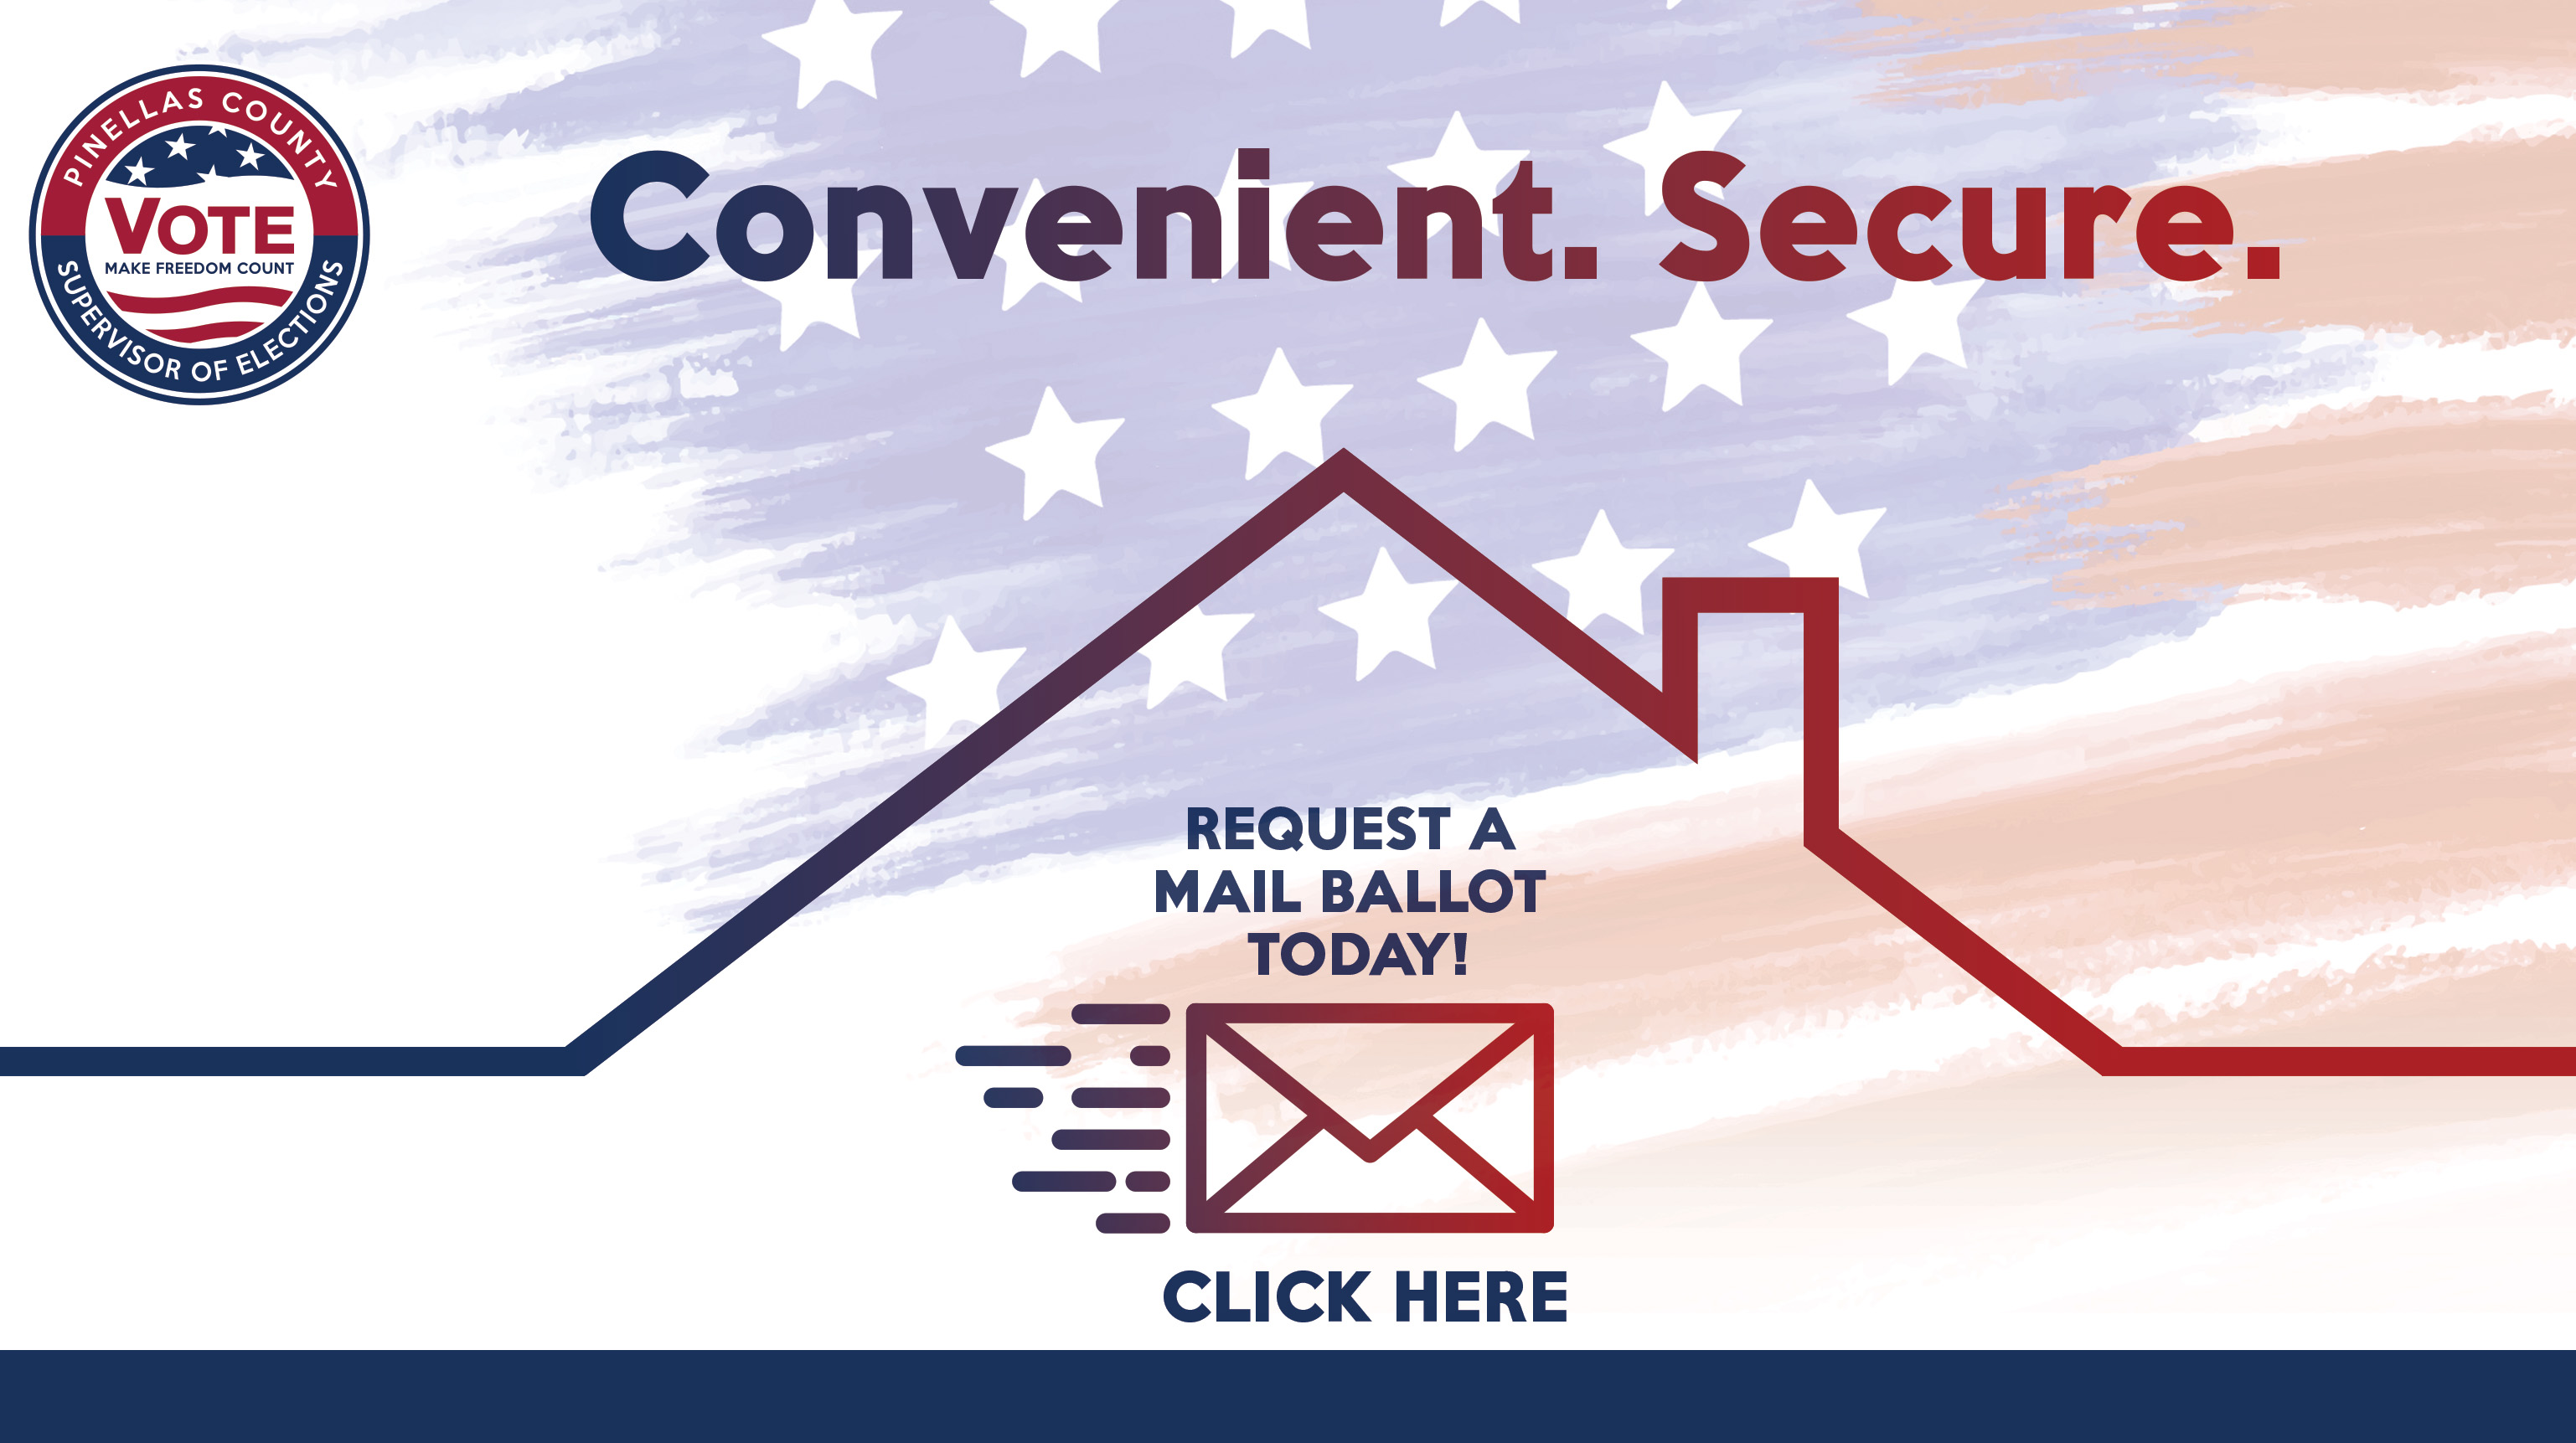 Convenient. Secure. Request a Mail Ballot Today! Click here